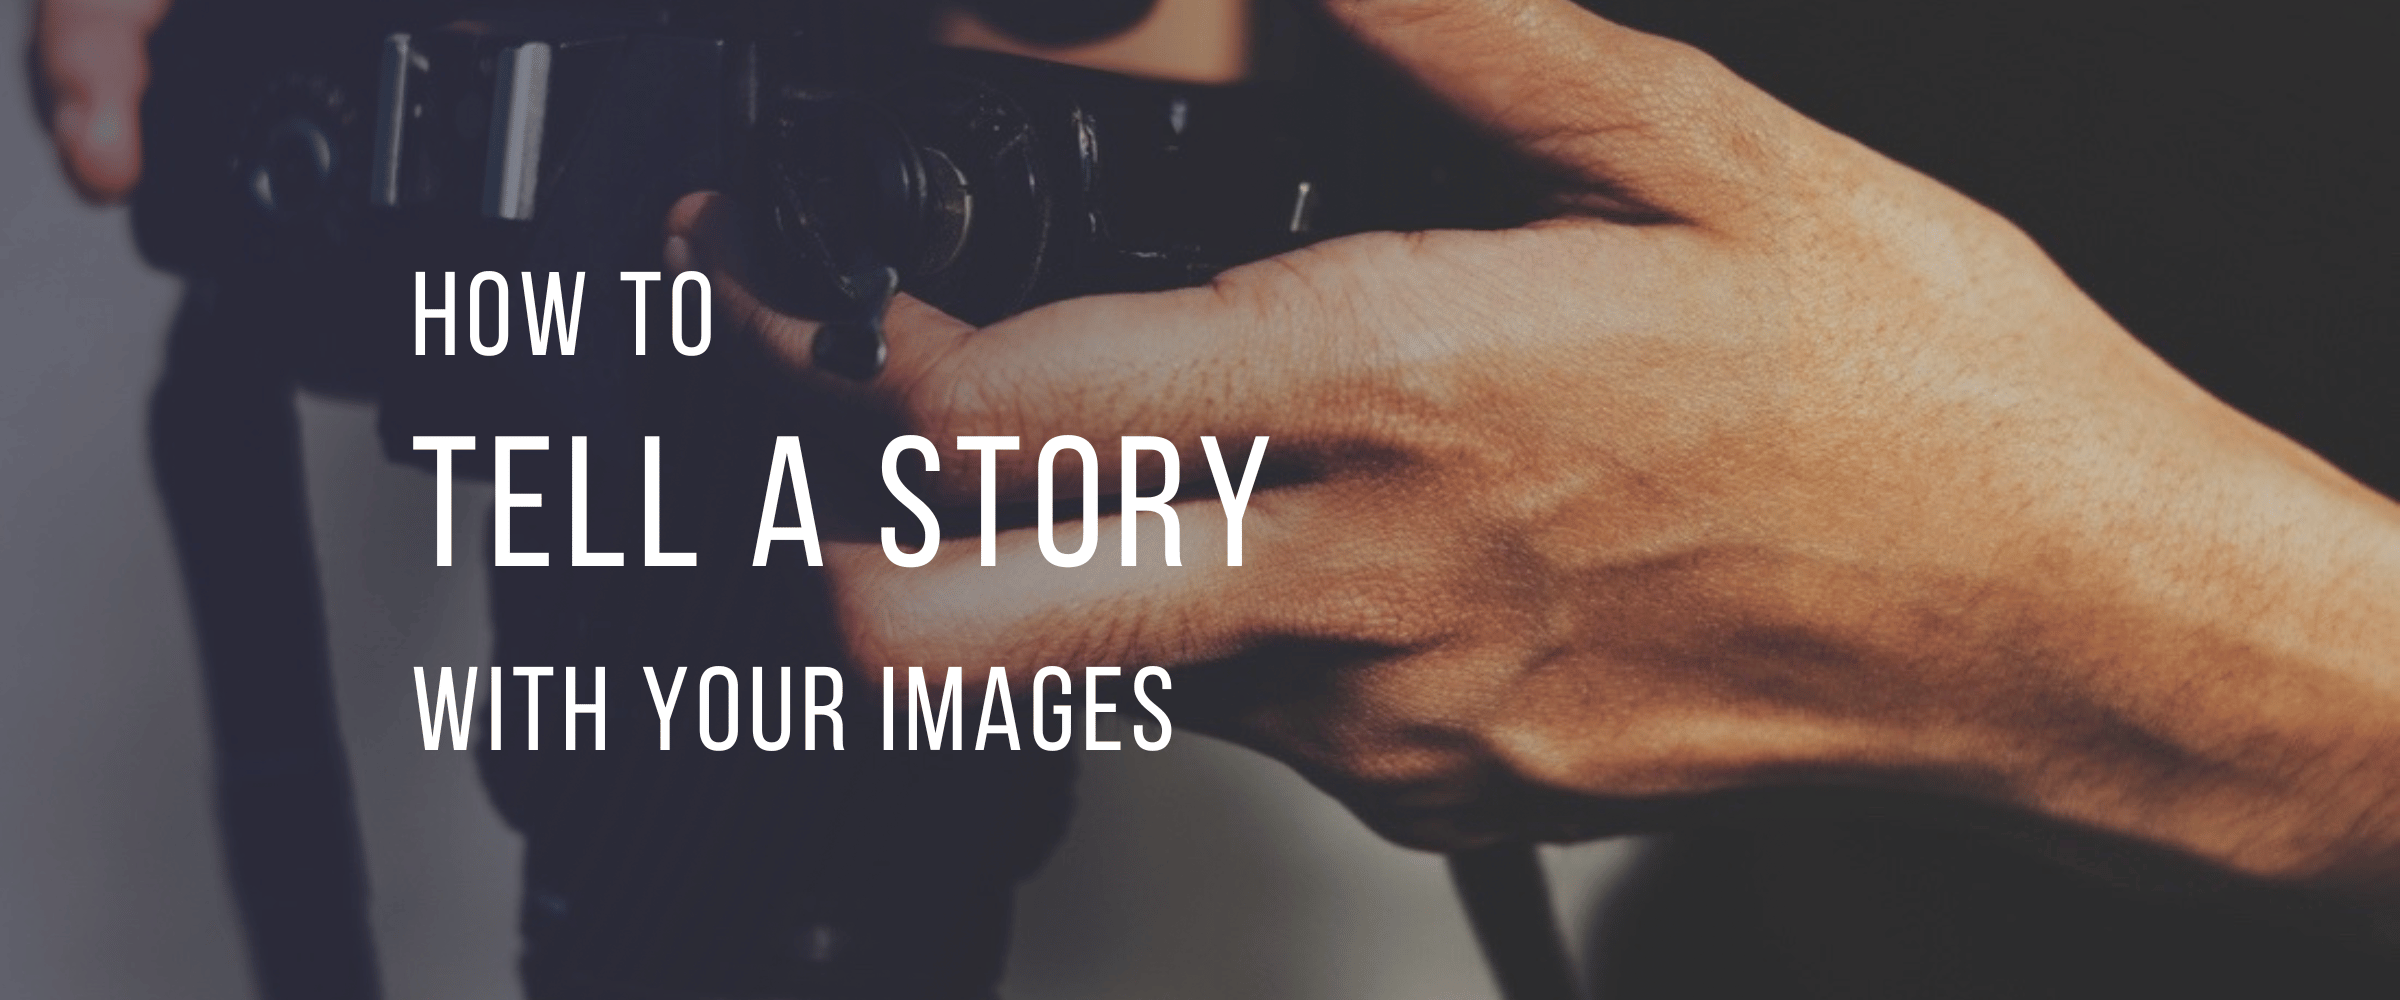 How to Tell a Story with Your Images 